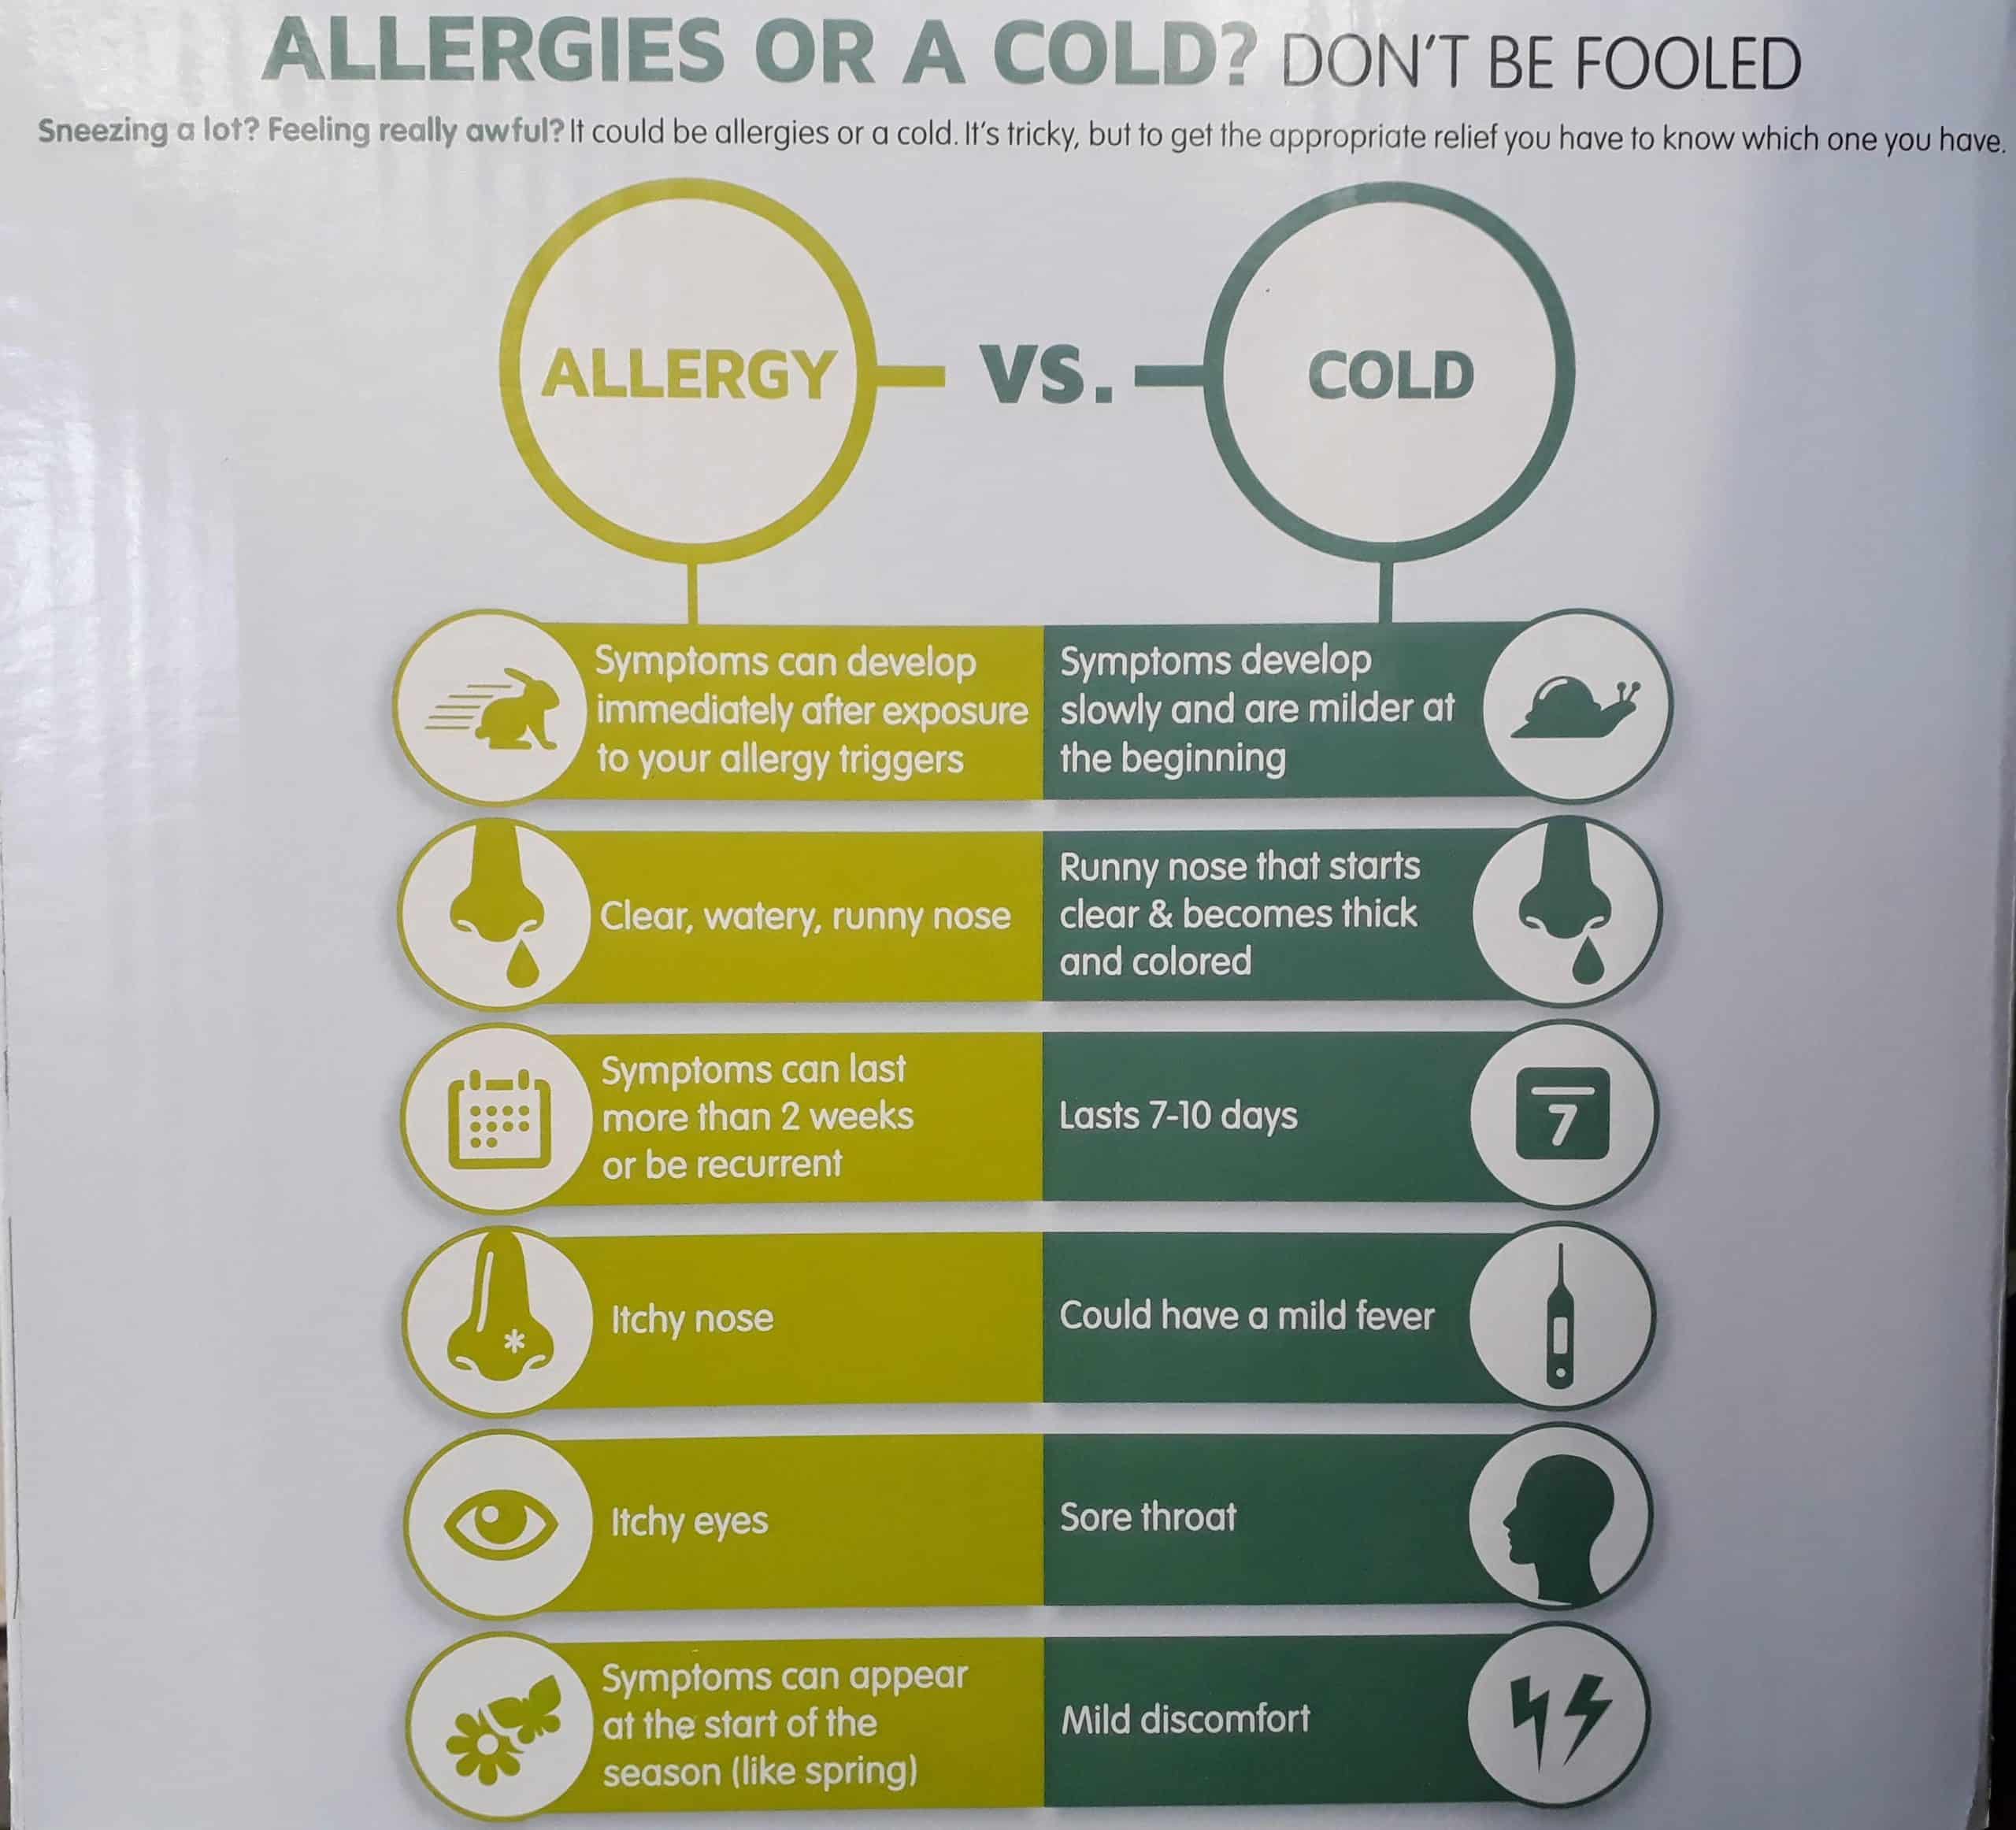 Is it an allergy or a cold?